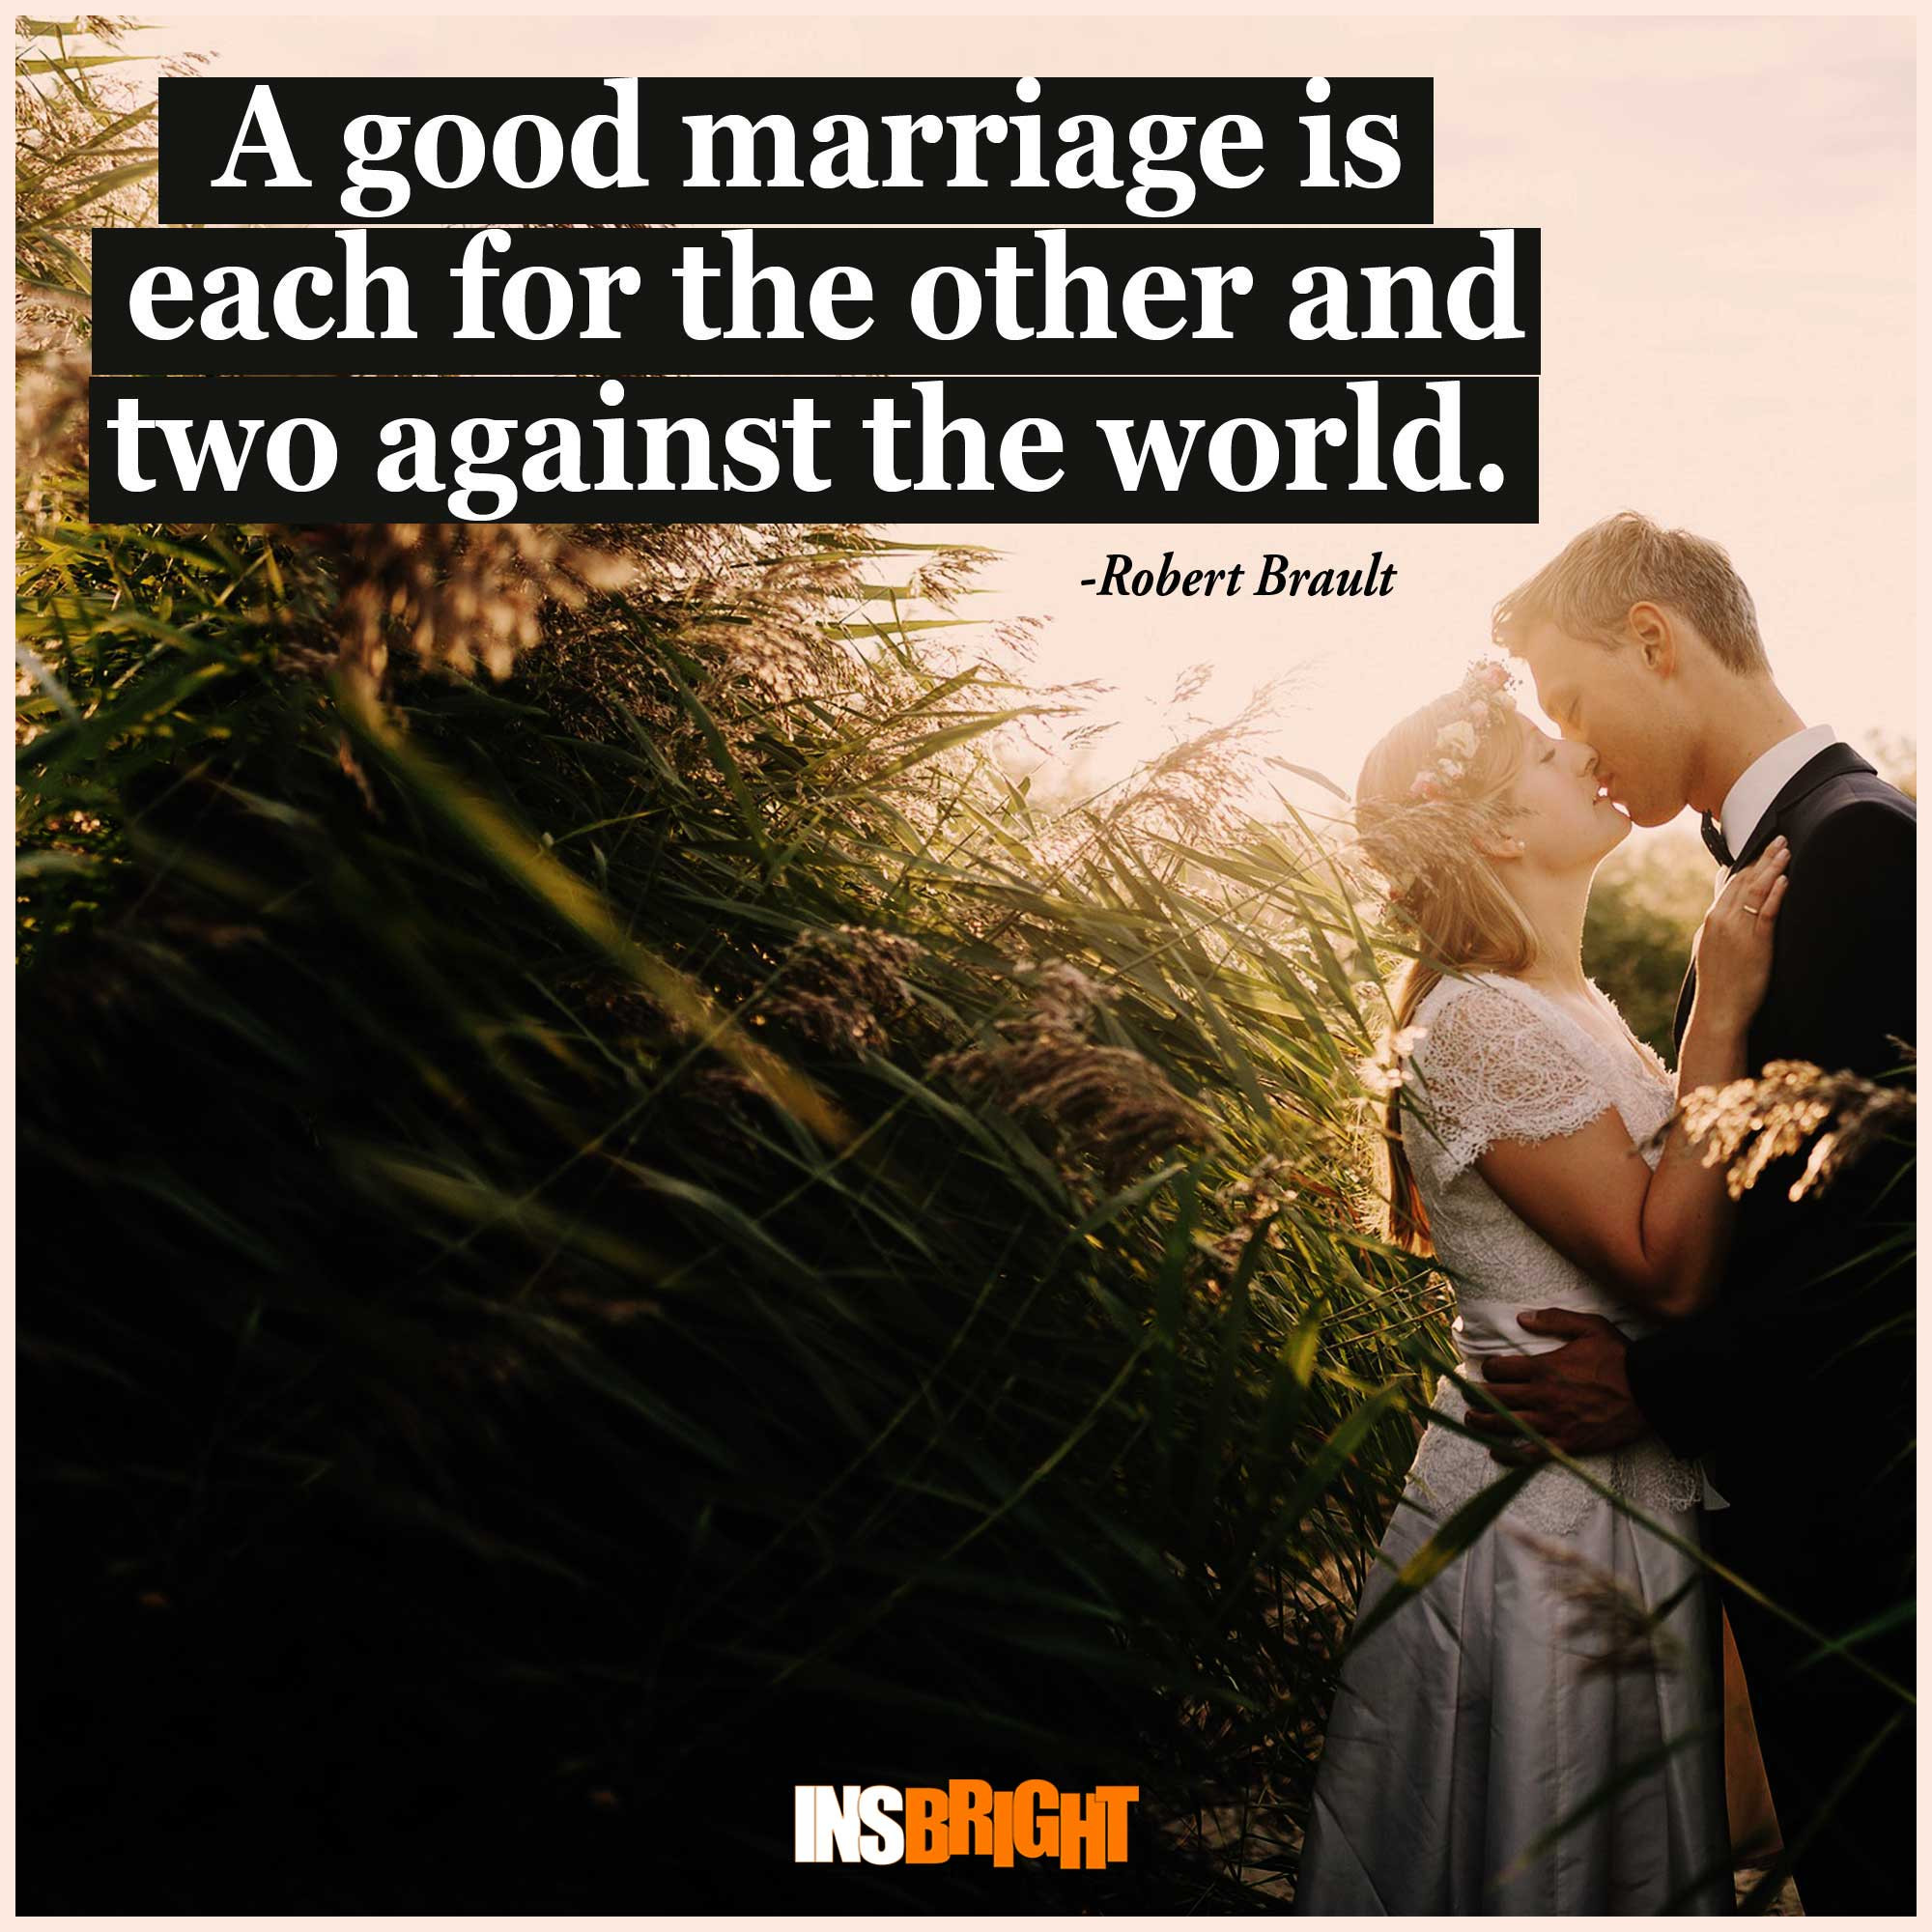 Best Marriage Quotes
 Inspirational Marriage Quotes By Famous People With